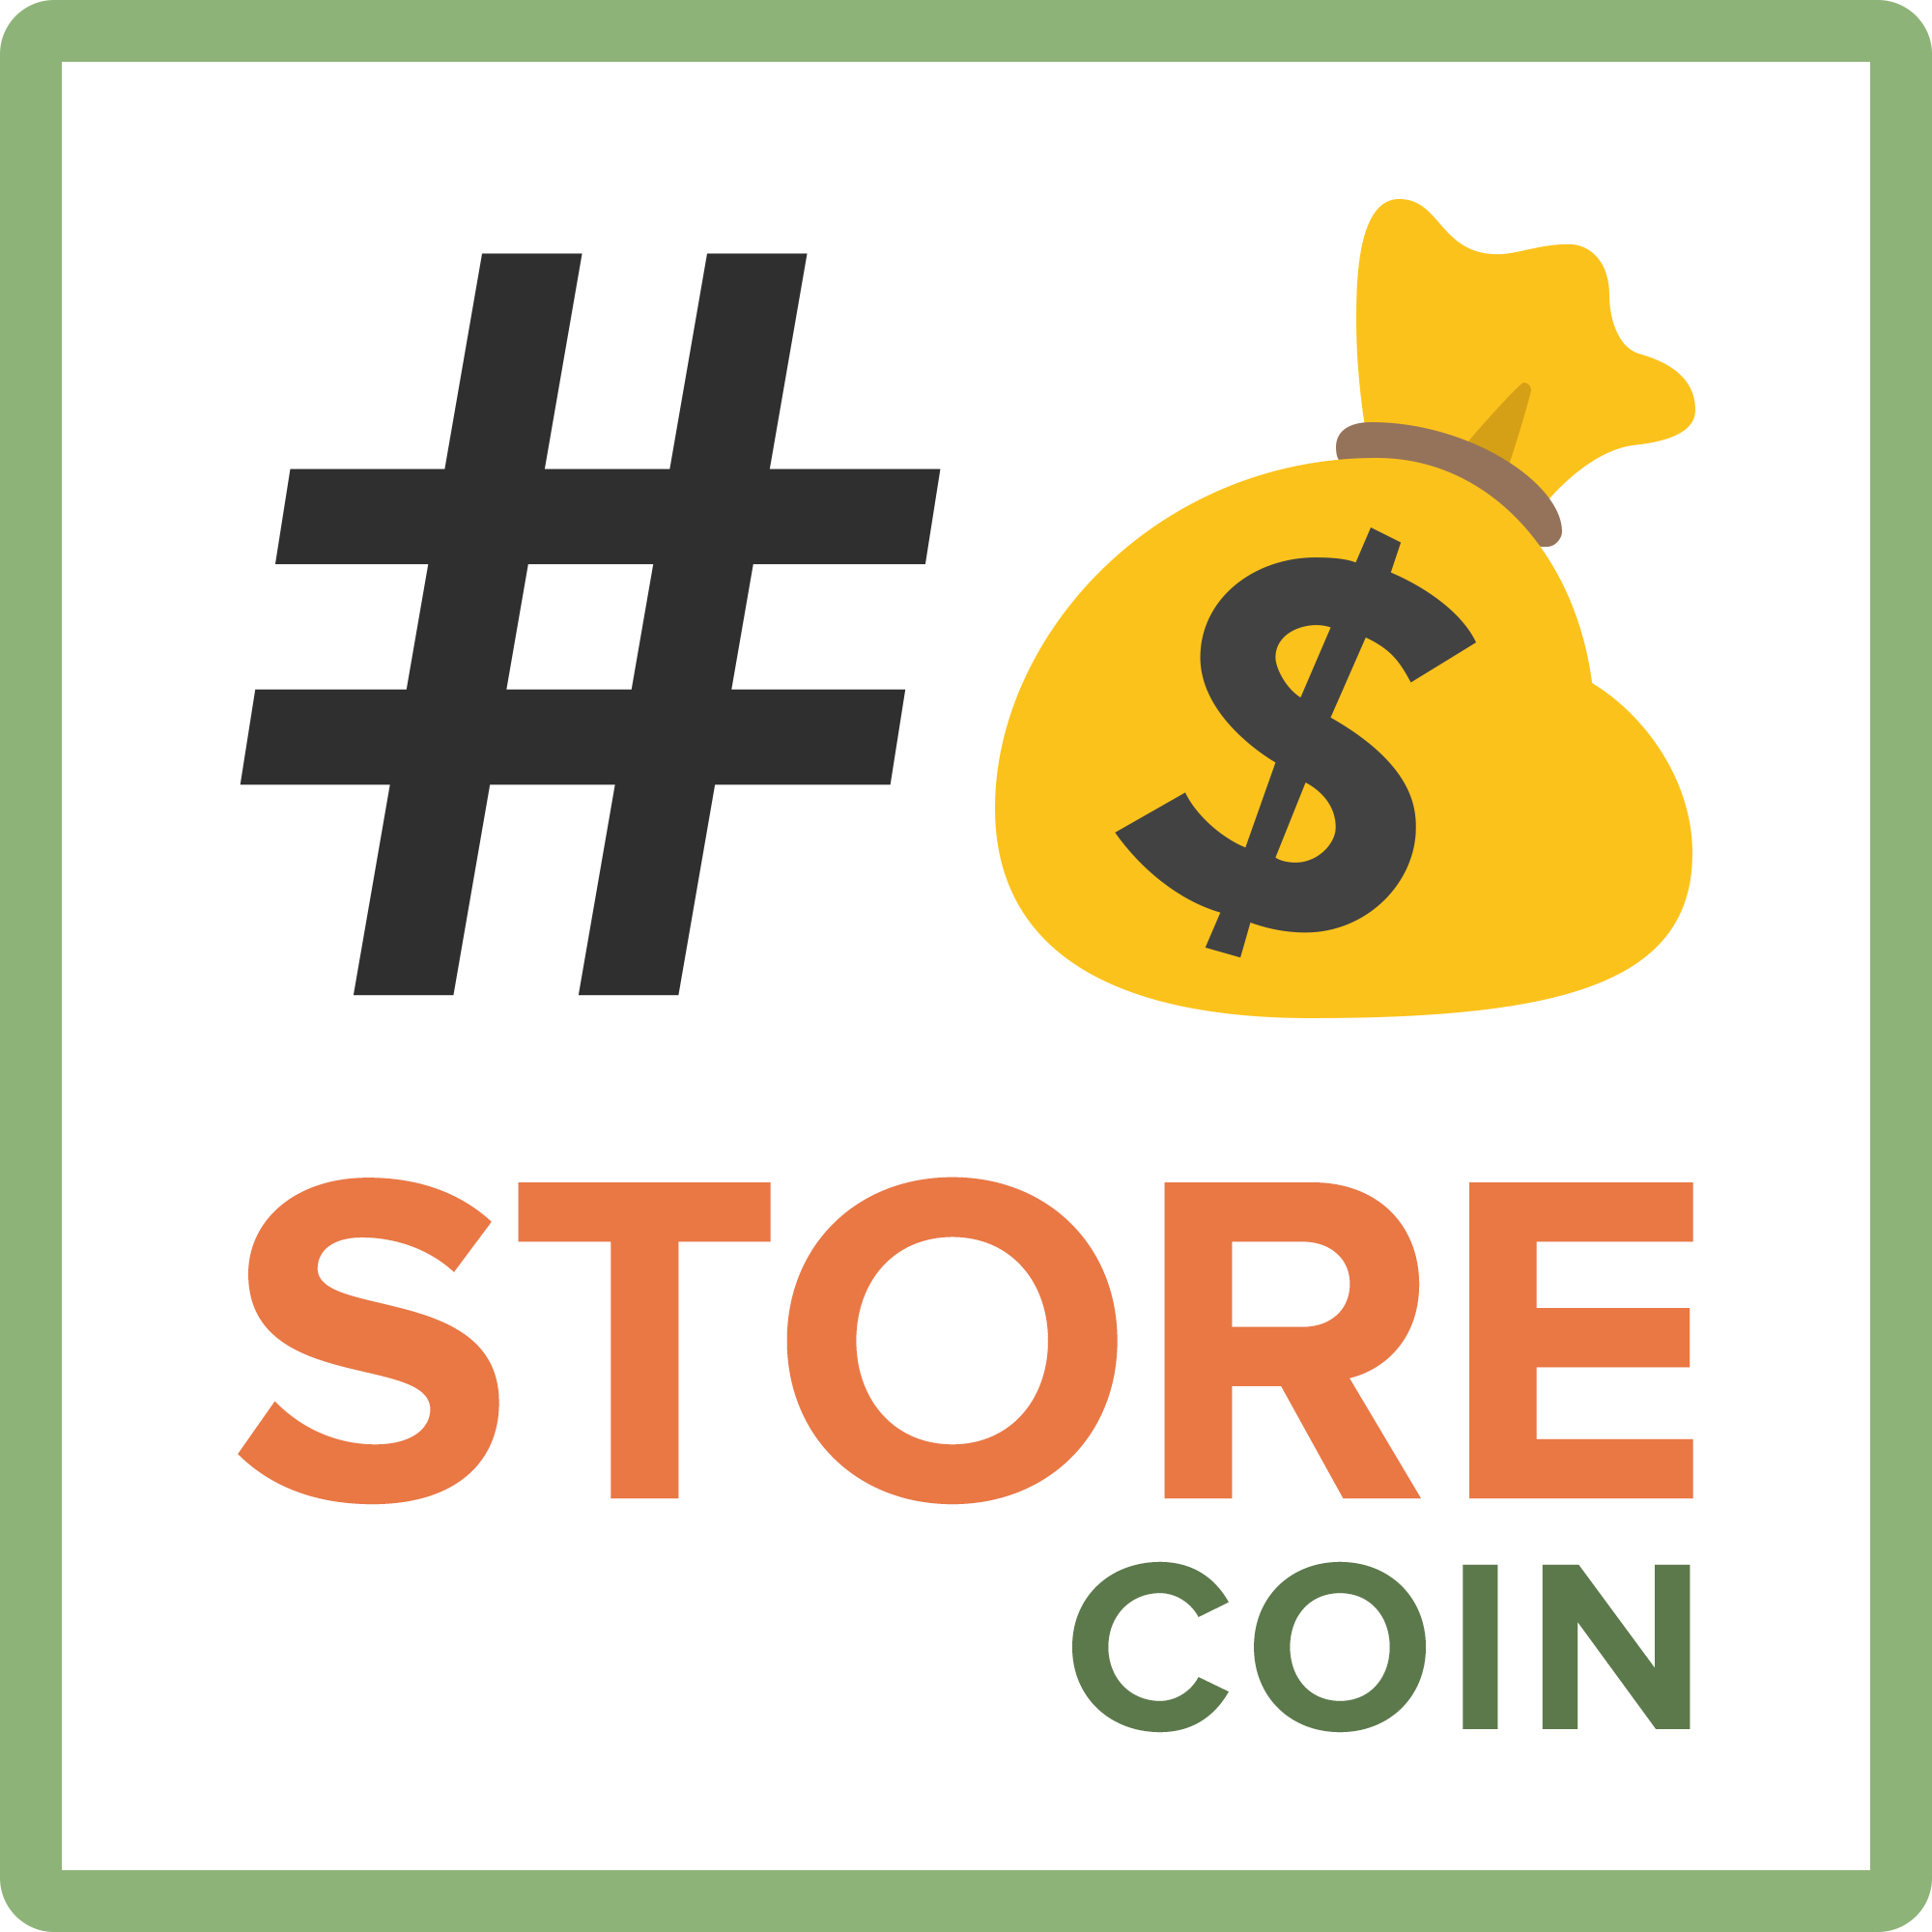 Storecoin